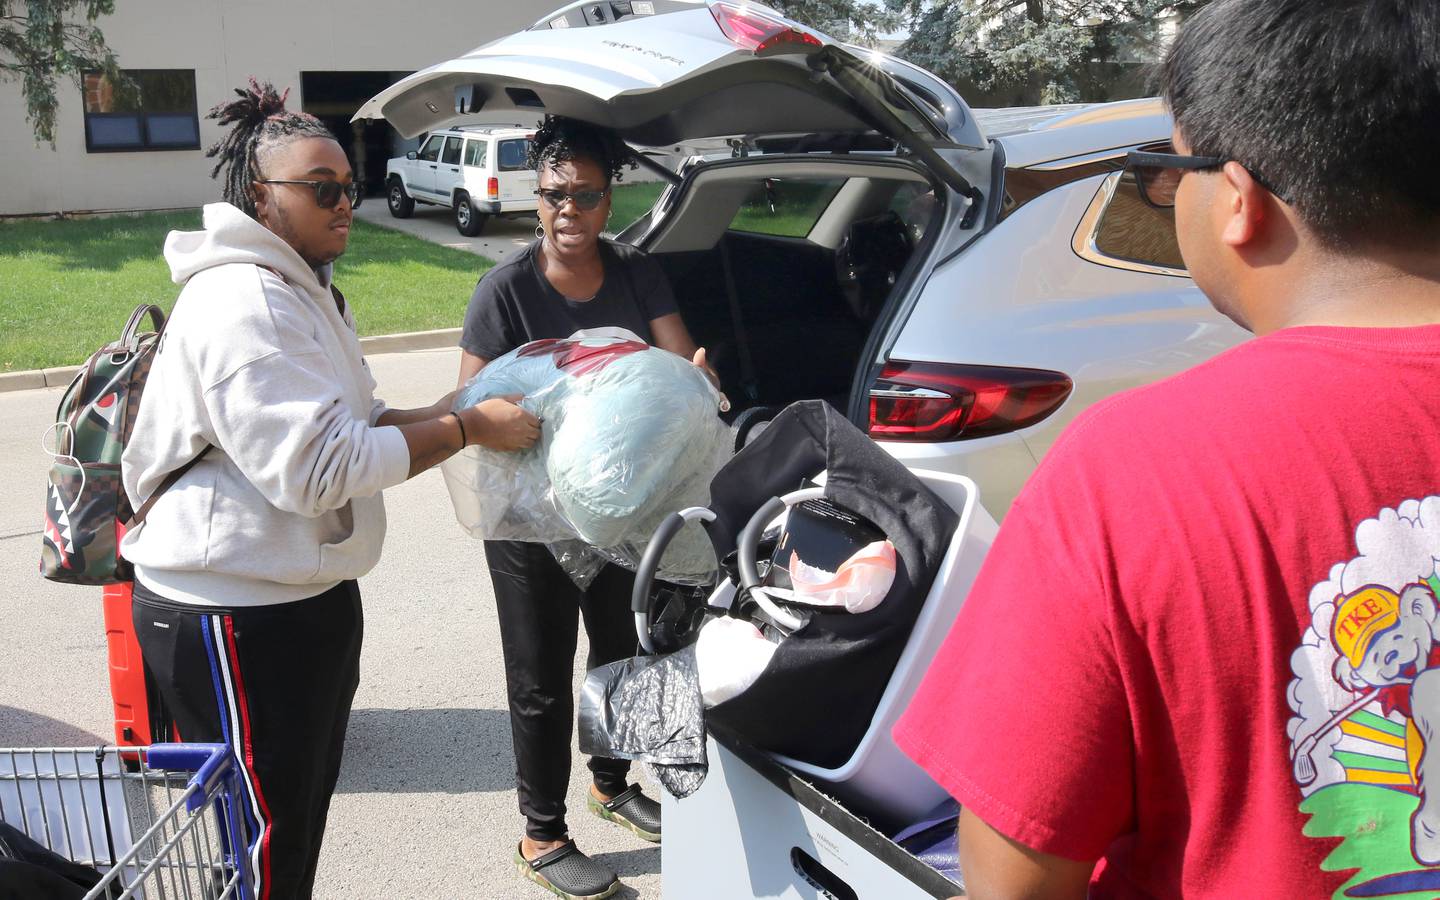 Northern Illinois University freshman Terrence Bradley, from Chicago, gets a hand from his mom Jeena as they unload things to move into his room Wednesday, Aug. 23, 2023, during move-in day in front of the Fanny Ruth Patterson Complex at NIU in DeKalb.